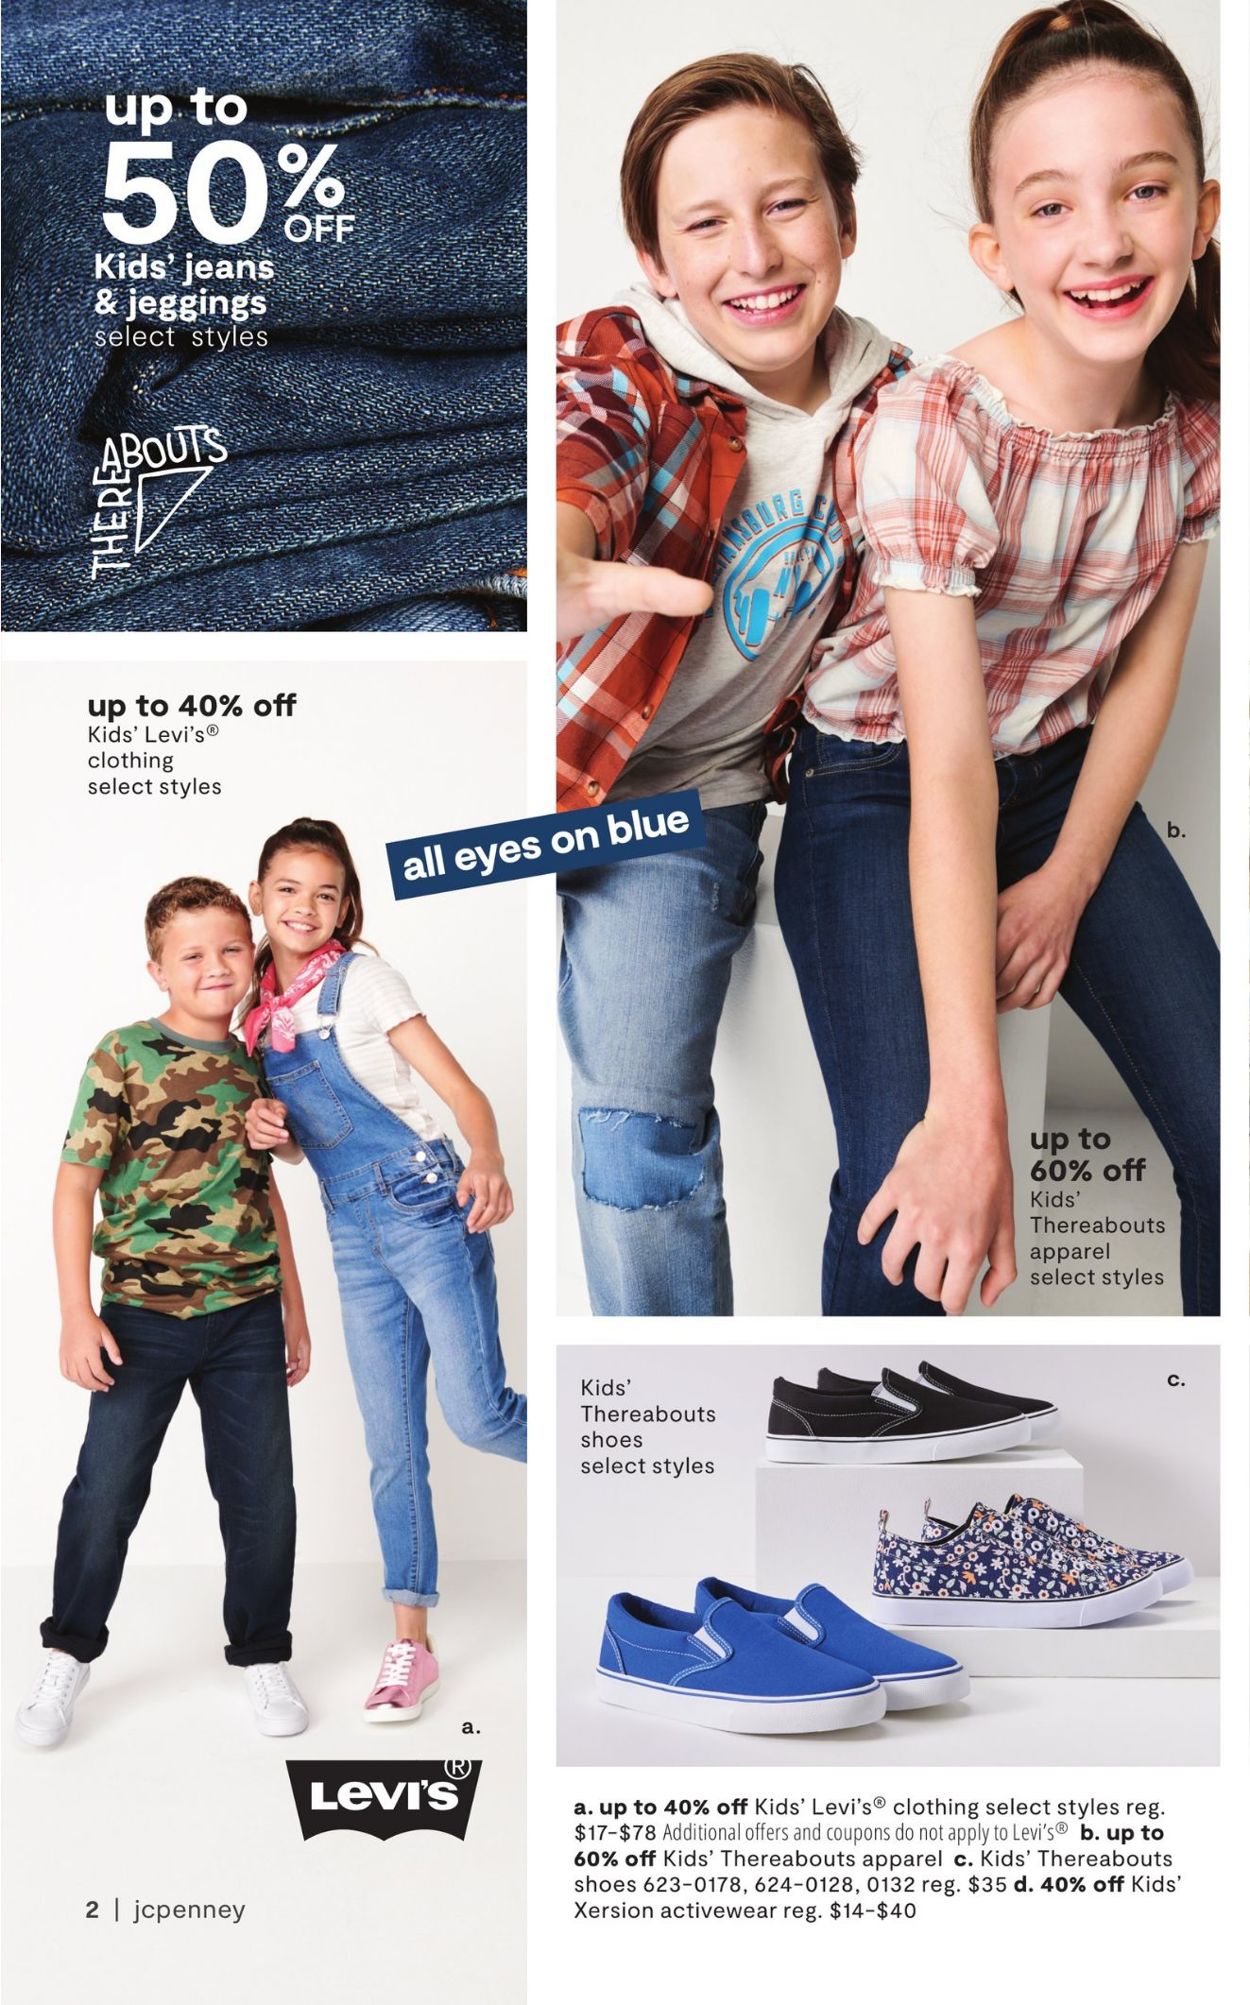 jcpenney-current-weekly-ad-07-11-08-28-2022-4-frequent-ads